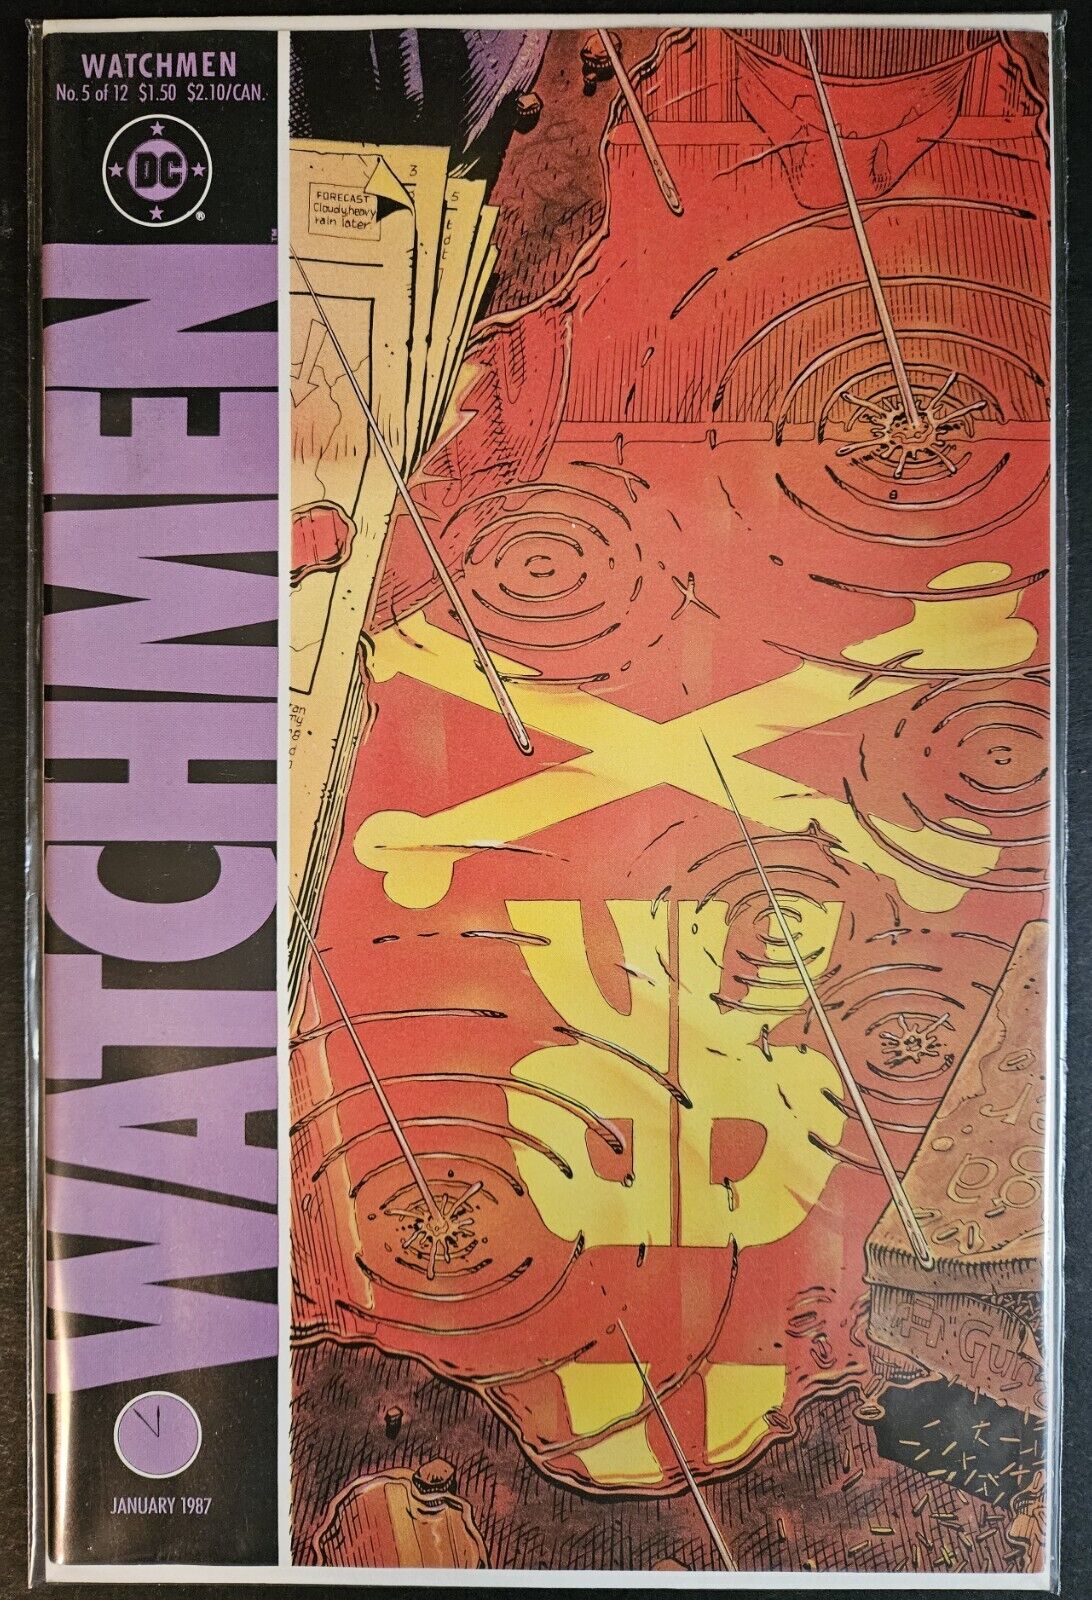 WATCHMEN #5 - DC Comics - Alan Moore & Dave Gibbons - 1986 - WE COMBINE SHIPPING